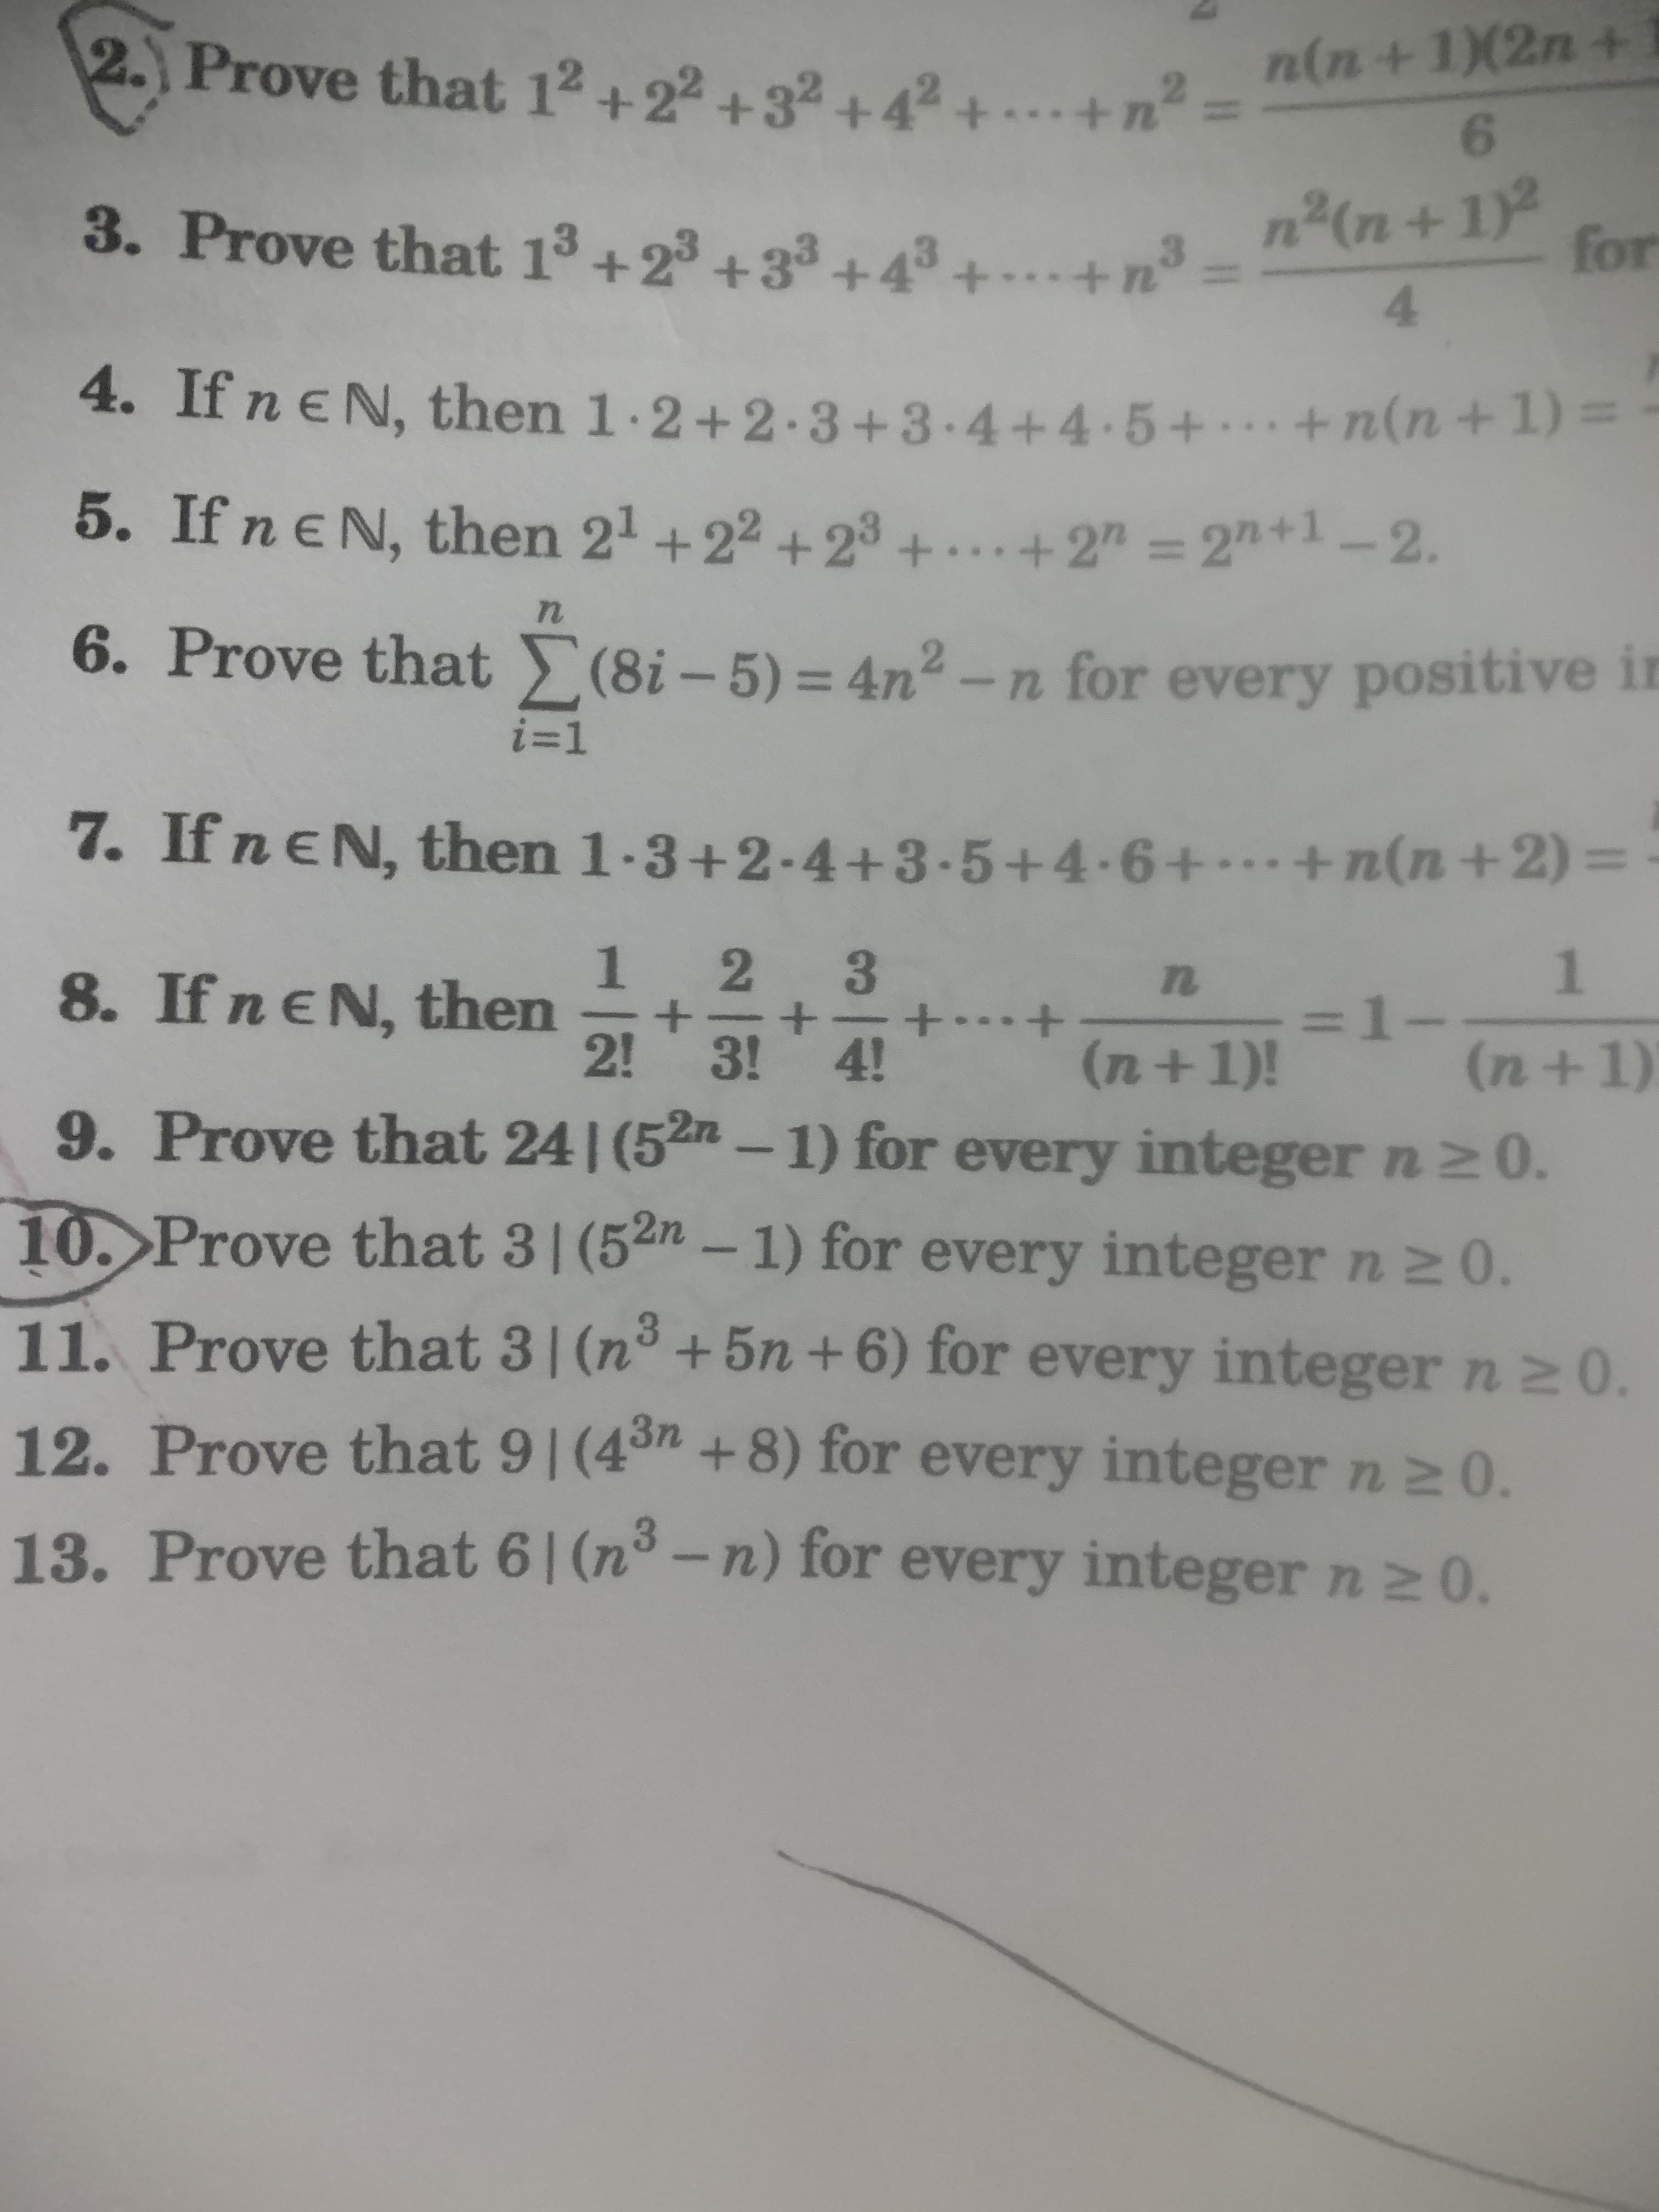 2n
10. Prove that 31 (5 - 1) for every integer n 2 0.
